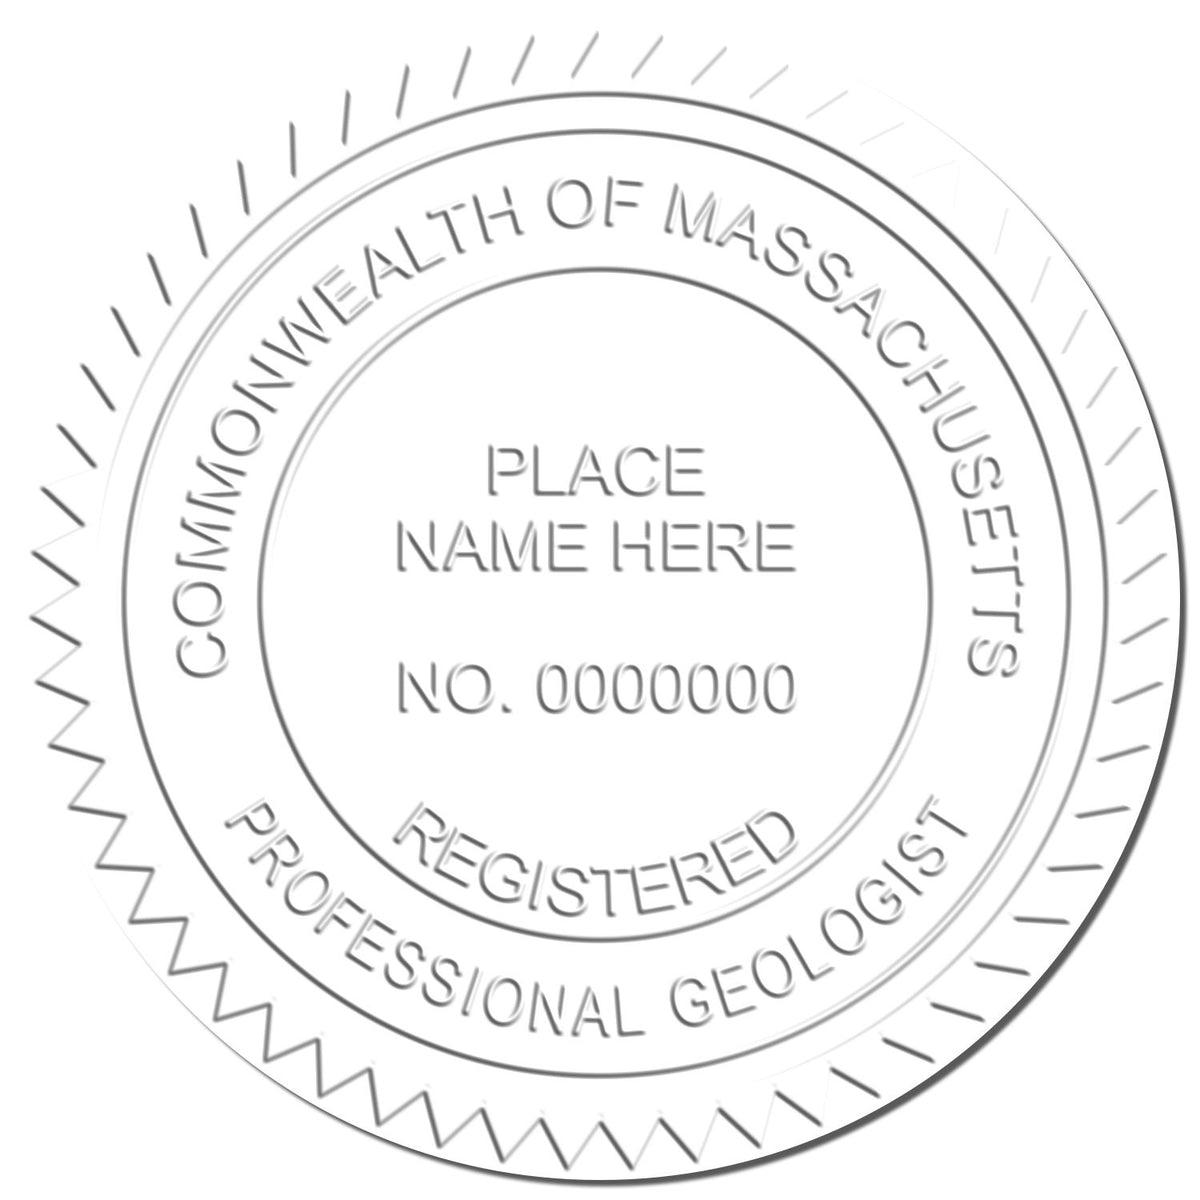 An in use photo of the Heavy Duty Cast Iron Massachusetts Geologist Seal Embosser showing a sample imprint on a cardstock